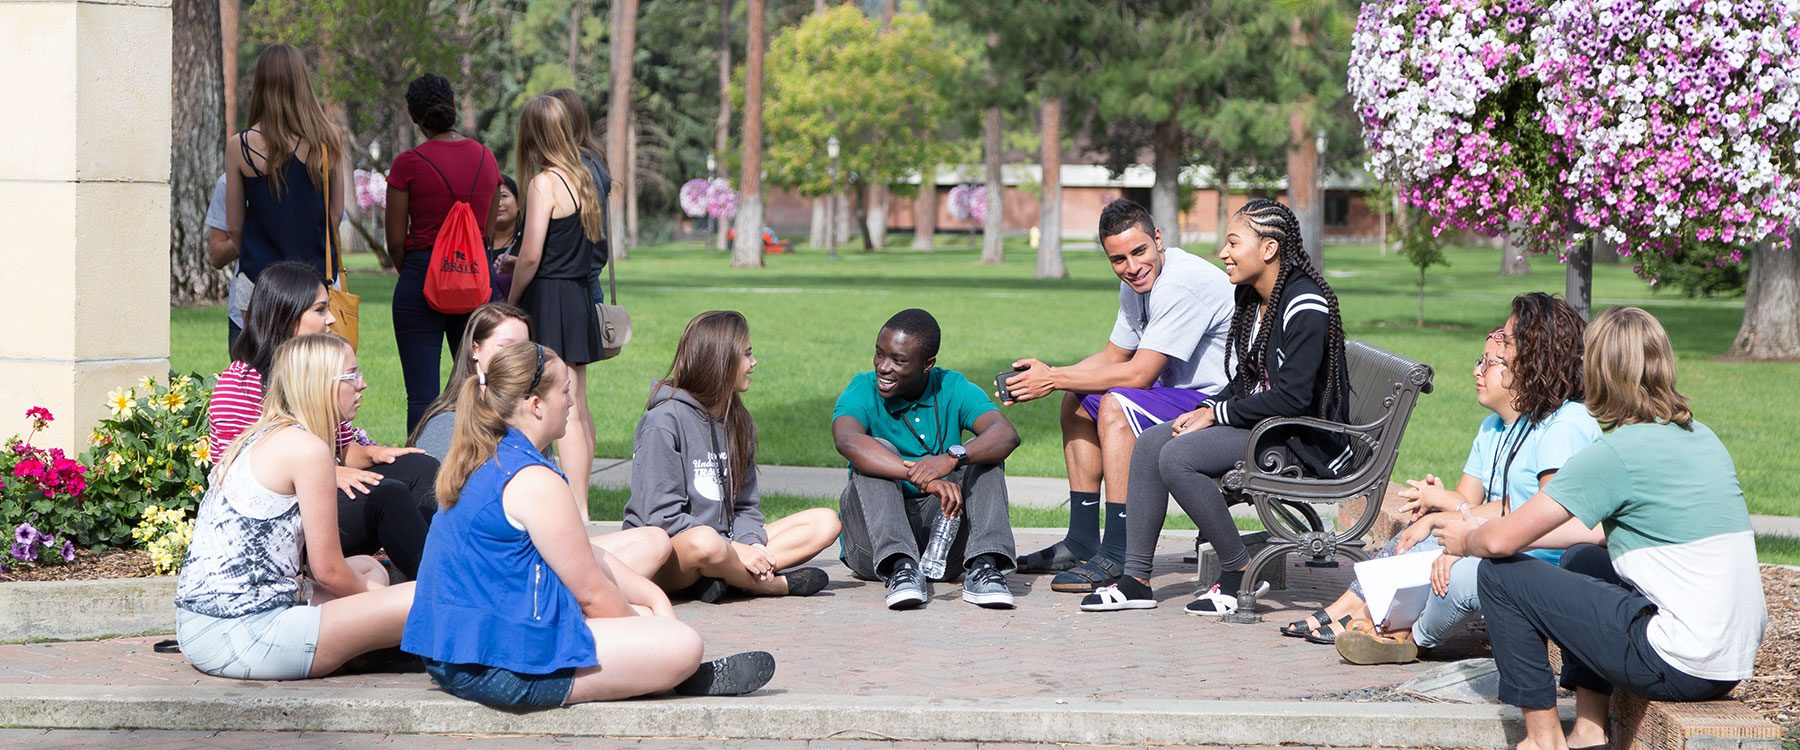 A diverse group of students sitting and talking in a grassy outdoor area on a sunny day.